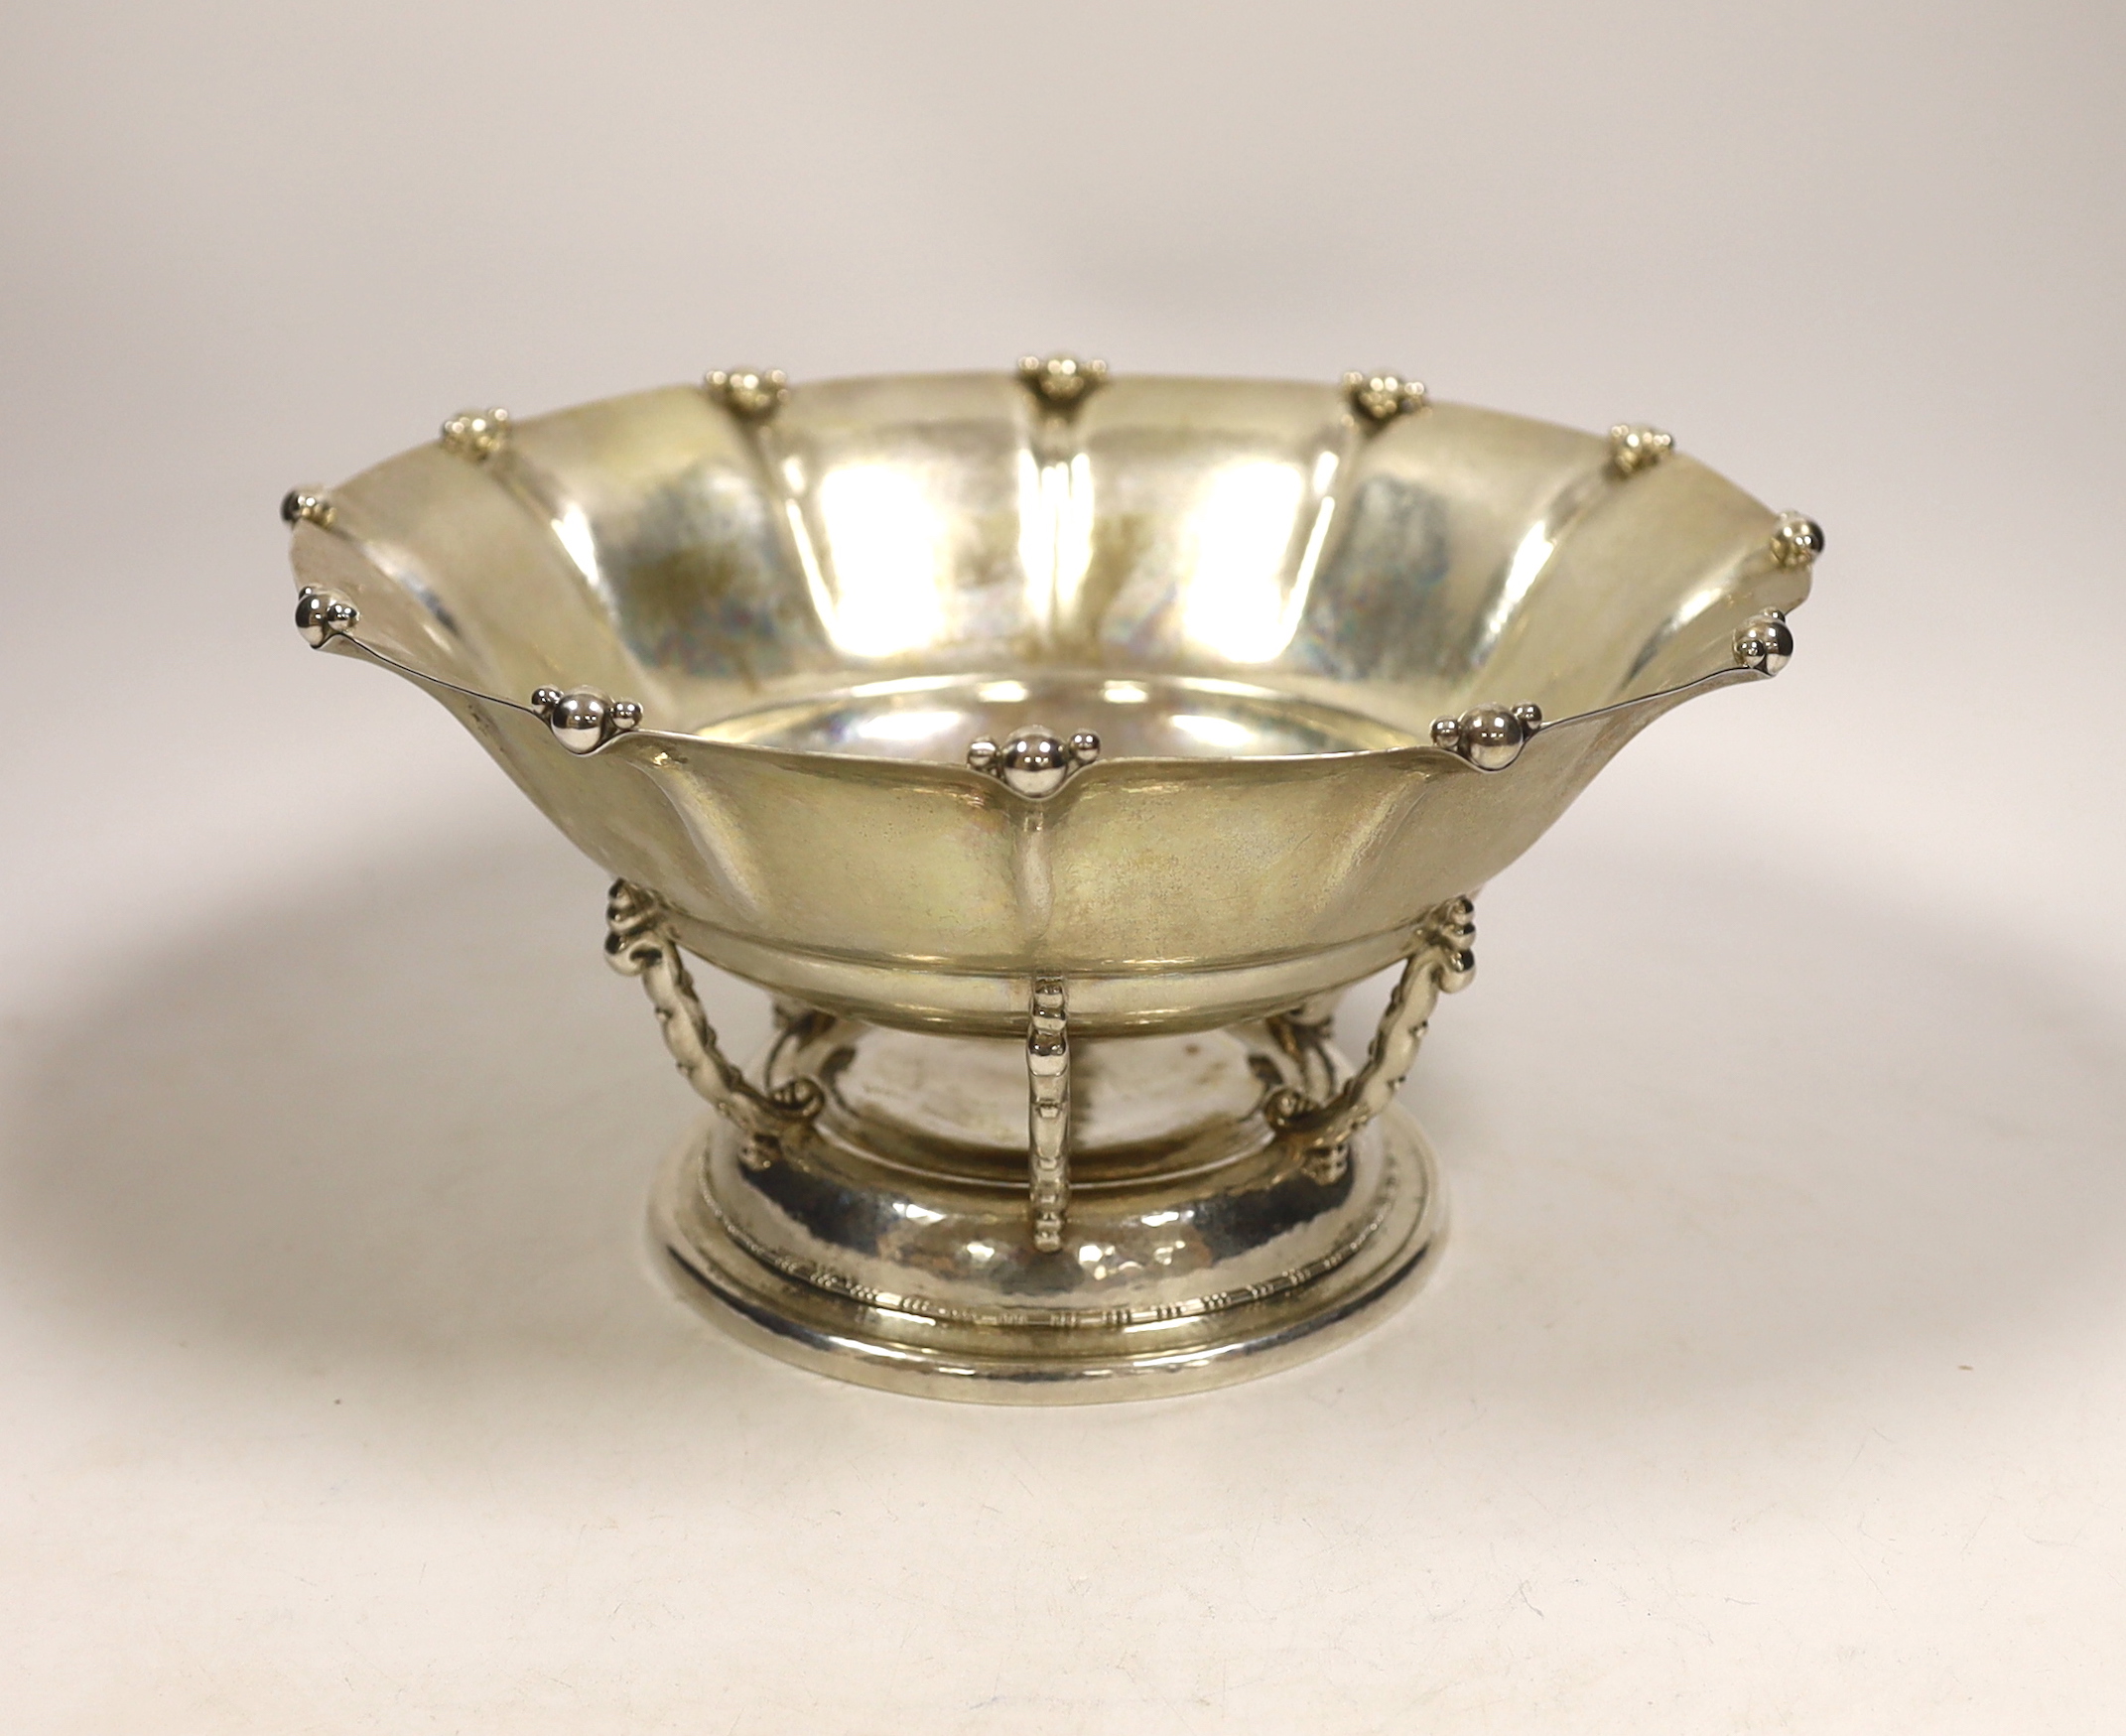 An early 20th century Swedish planished white metal circular fruit bowl, by Karl Anderson, date